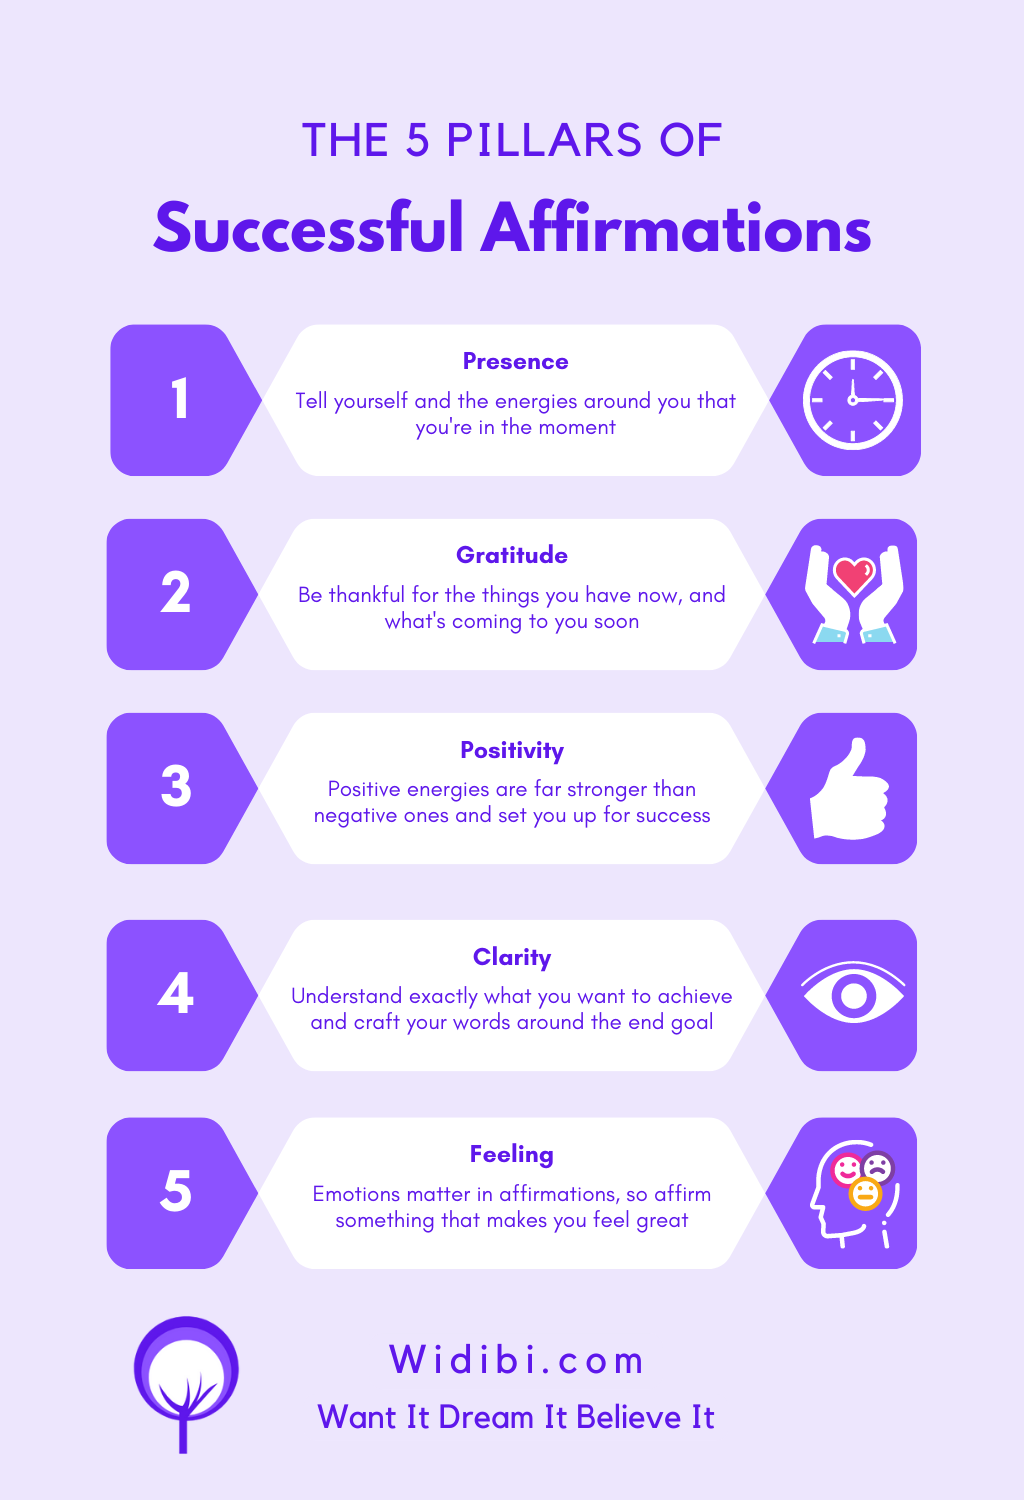 The 5 Pillars of Successful Affirmations